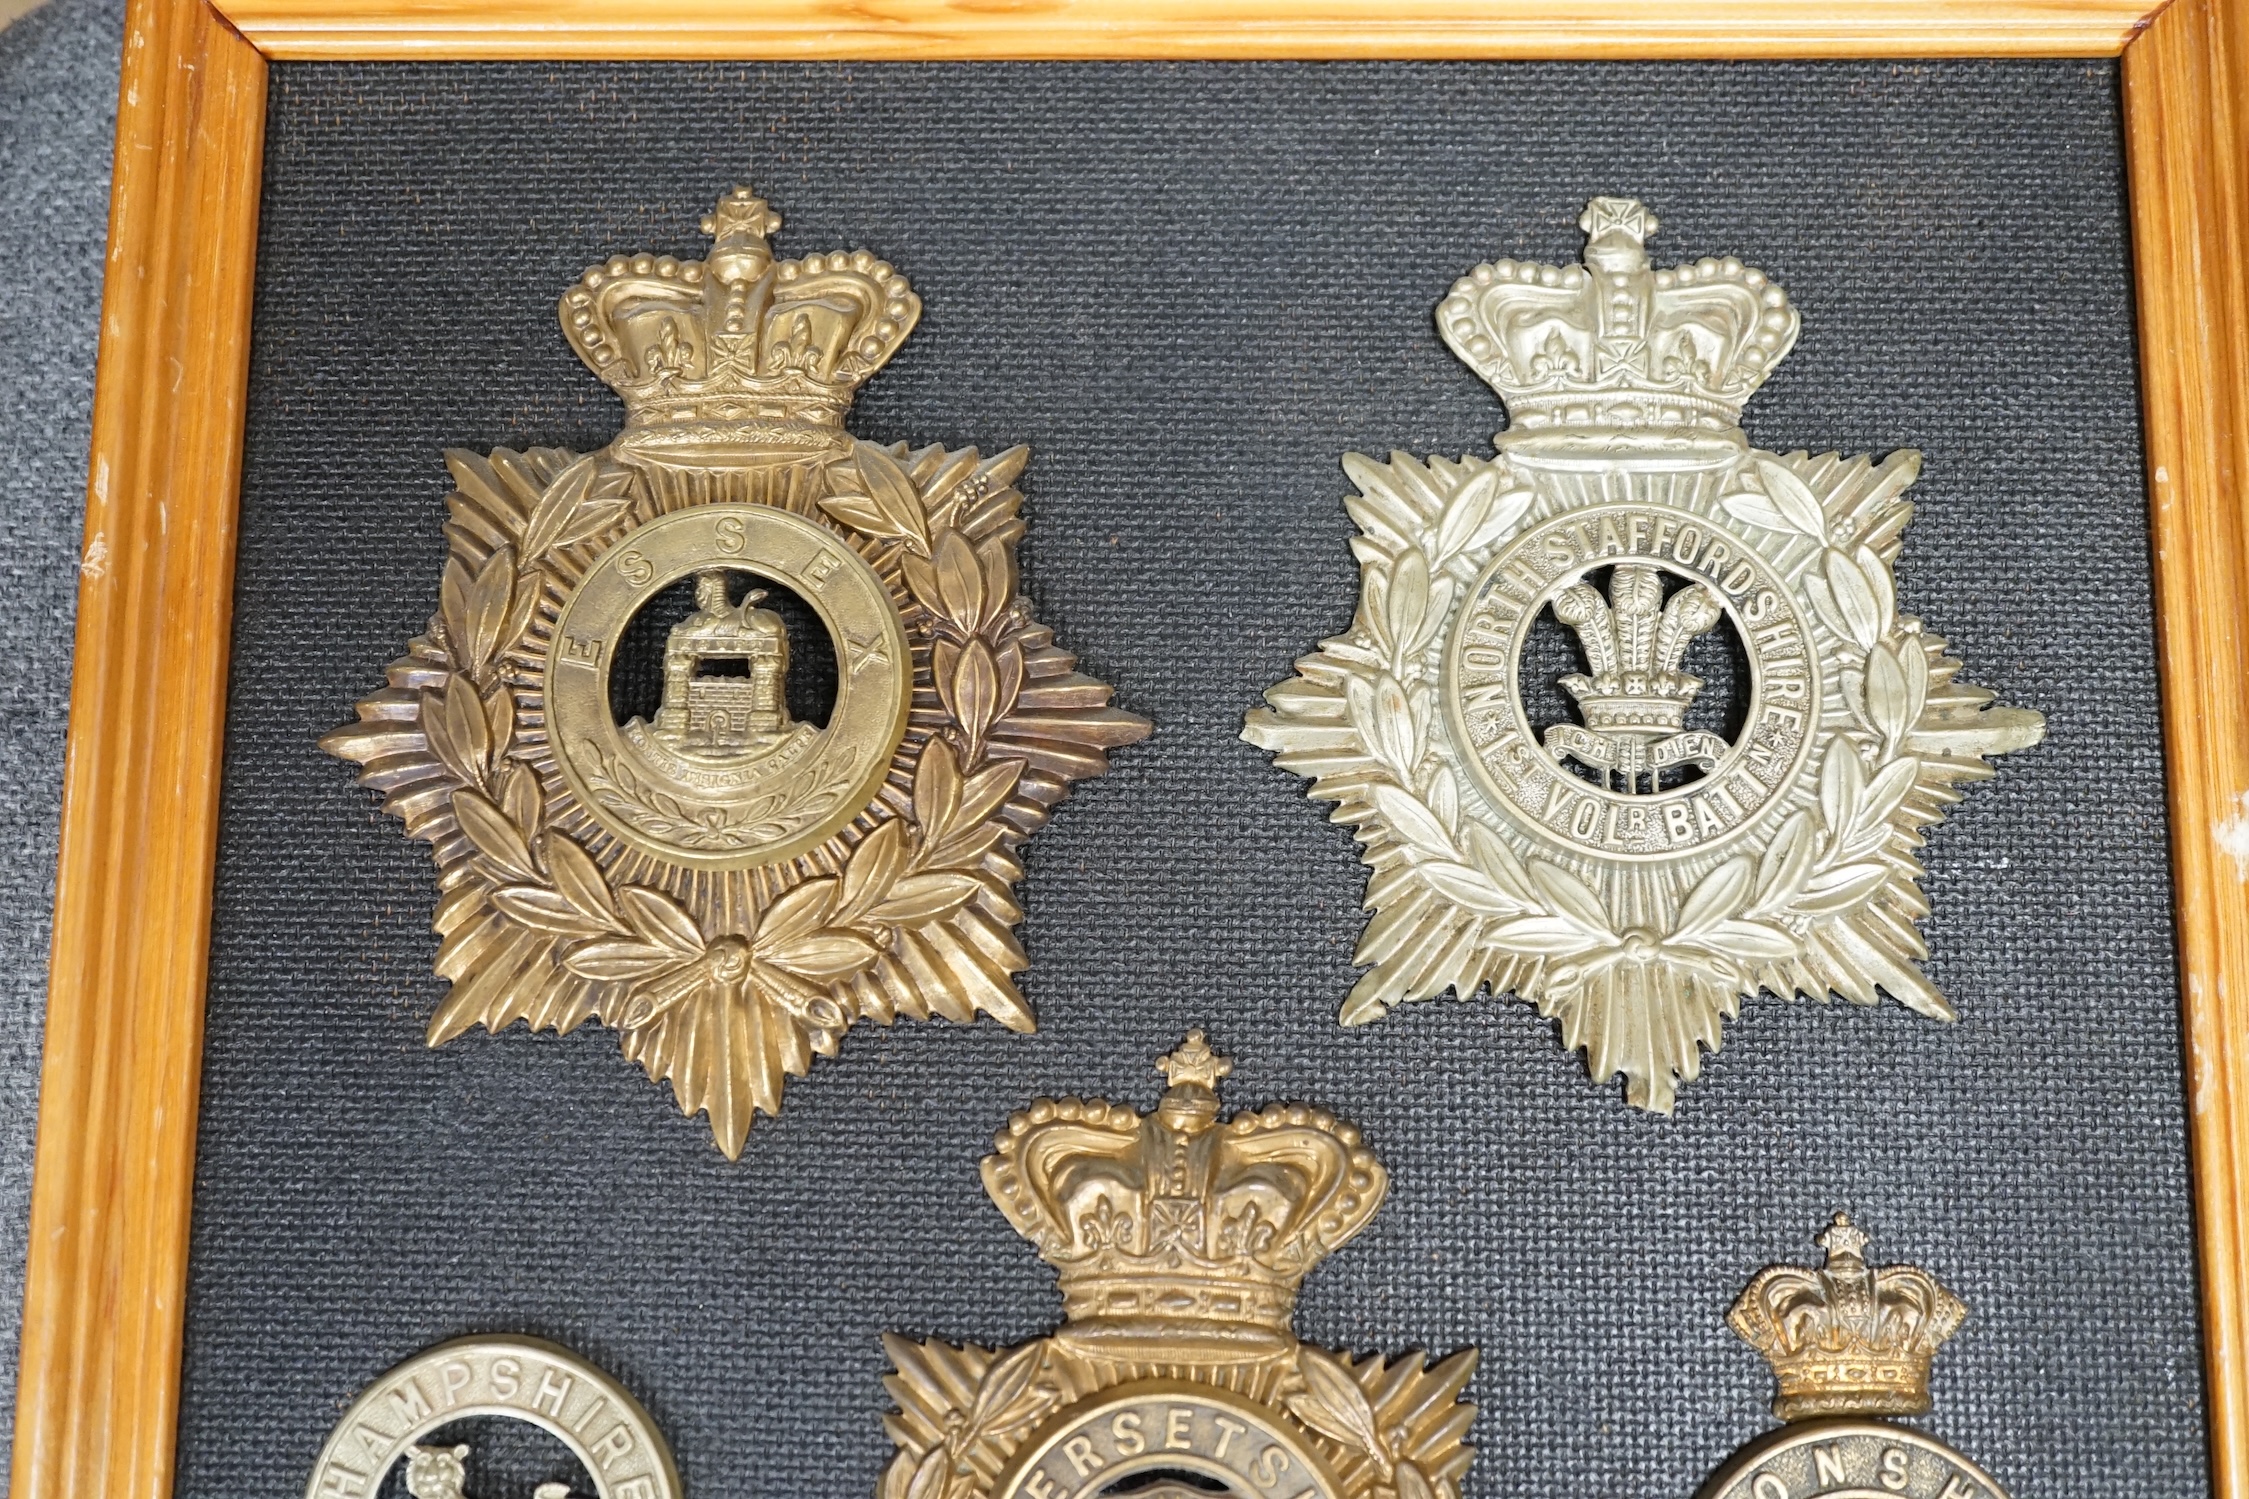 Five military helmet plates and two other centre badges, mounted on a board including; the Essex Regiment, the North Staffordshire 1st Volunteer Battalion, the Somerset Regiment, the Buffs East Kent Regiment, the King’s